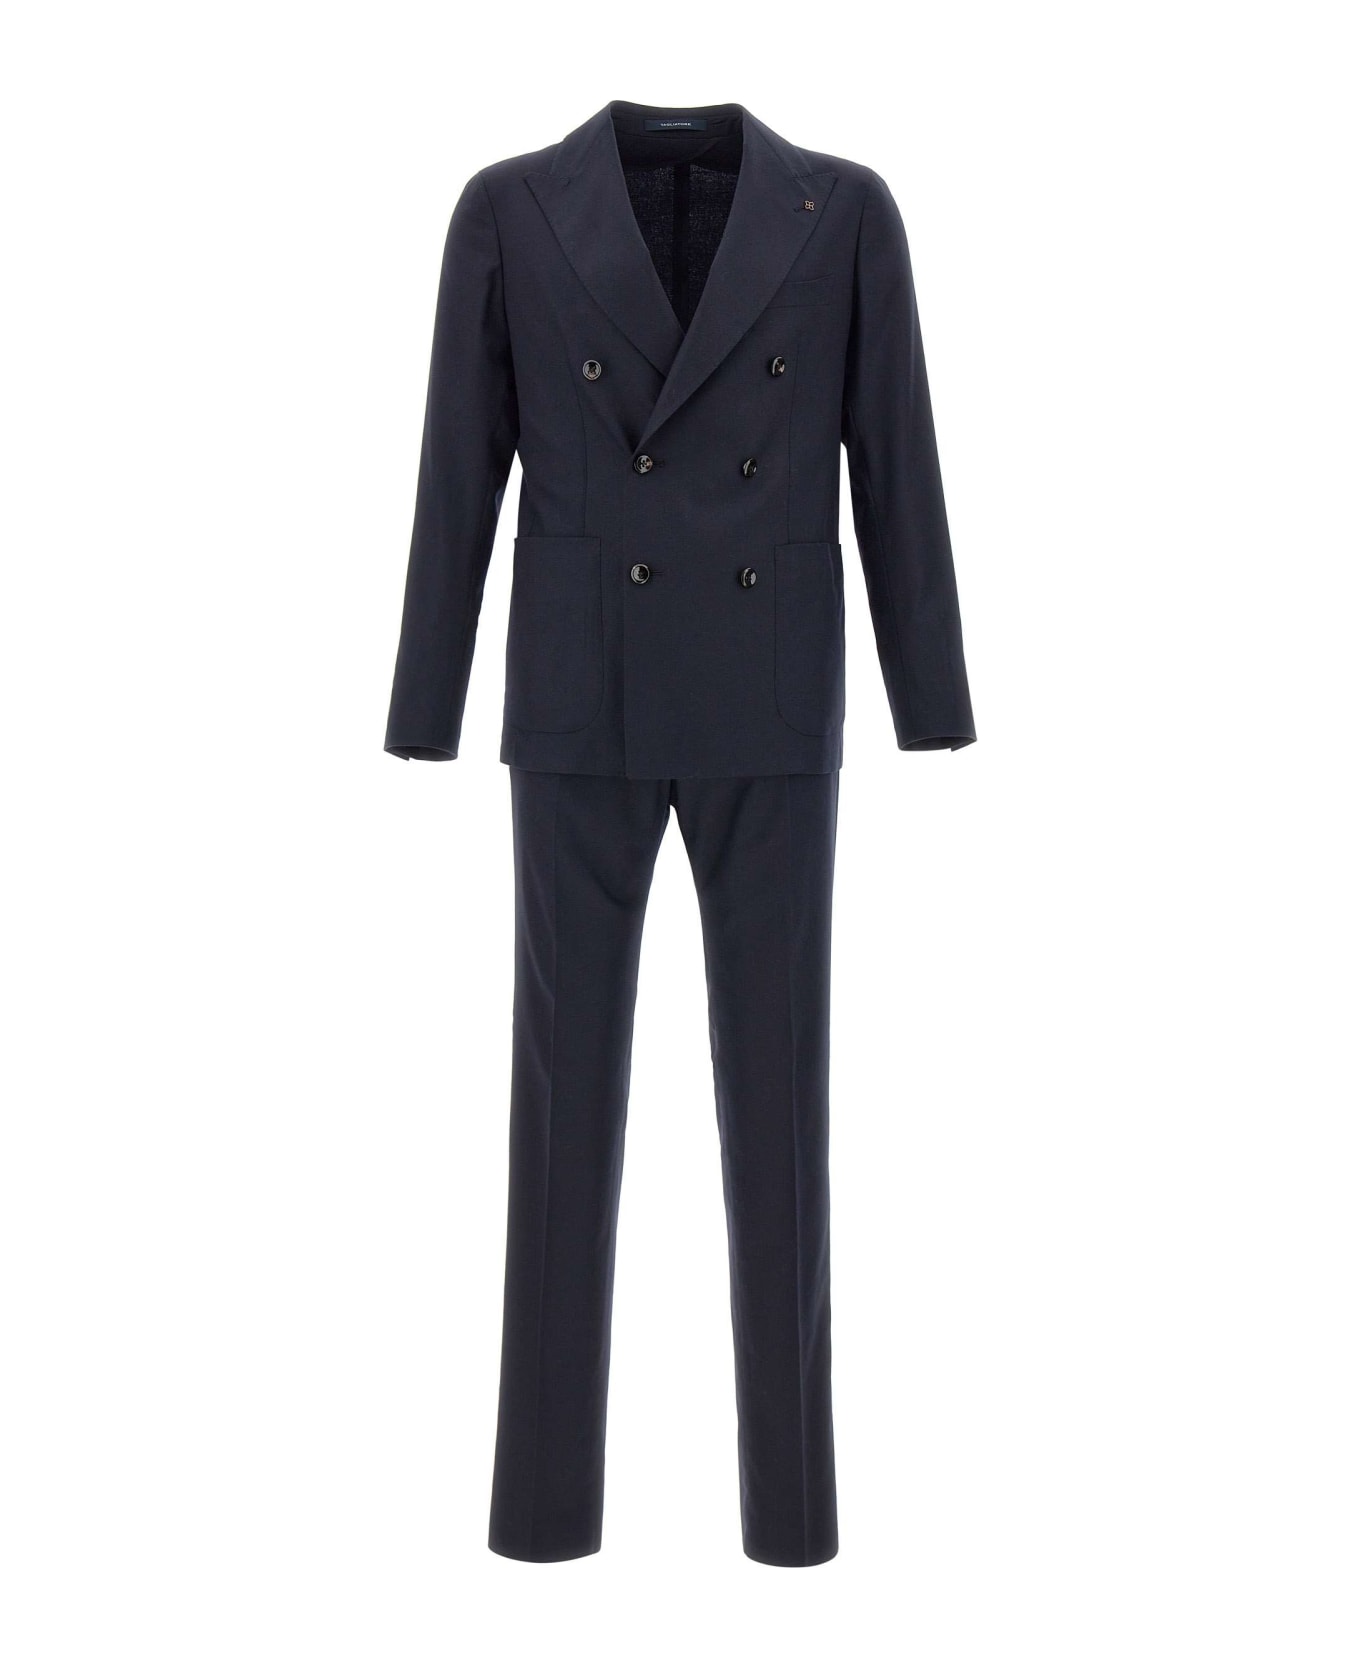 Tagliatore Wool And Cashmere Suit - BLUE スーツ